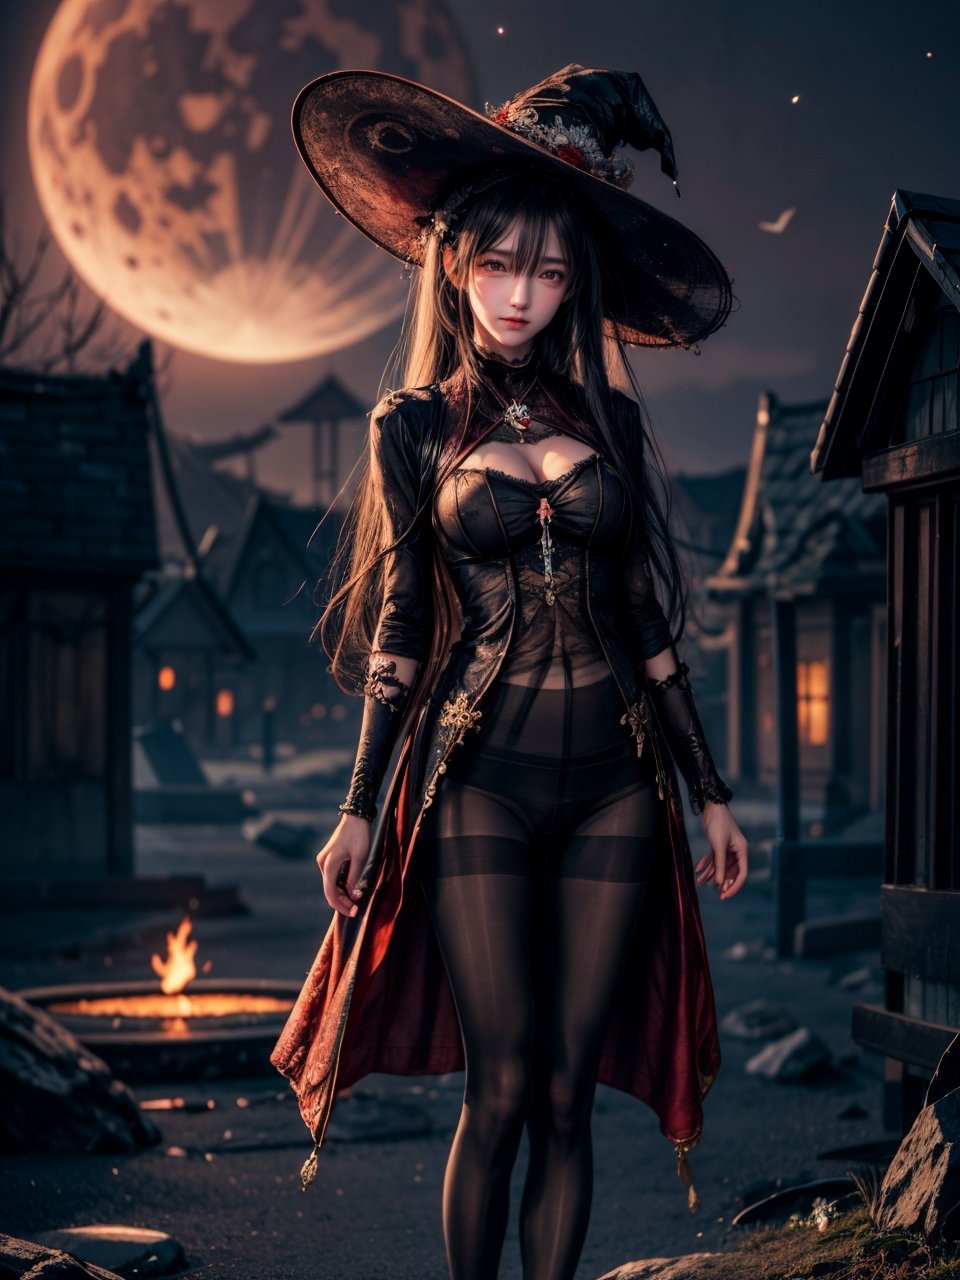 ((((((Whole_body_from_far_away)))))), (((pantyhose))), A hauntingly beautiful illustration of a witch standing in a spooky graveyard under a blood-red moon, The witch should be portrayed with fine details and realistic shading. The artwork should be in a high resolution and digitally painted by renowned artists like Luis Royo and Jasmine Becket-Griffith. The overall composition should evoke a sense of mystery and enchantment.